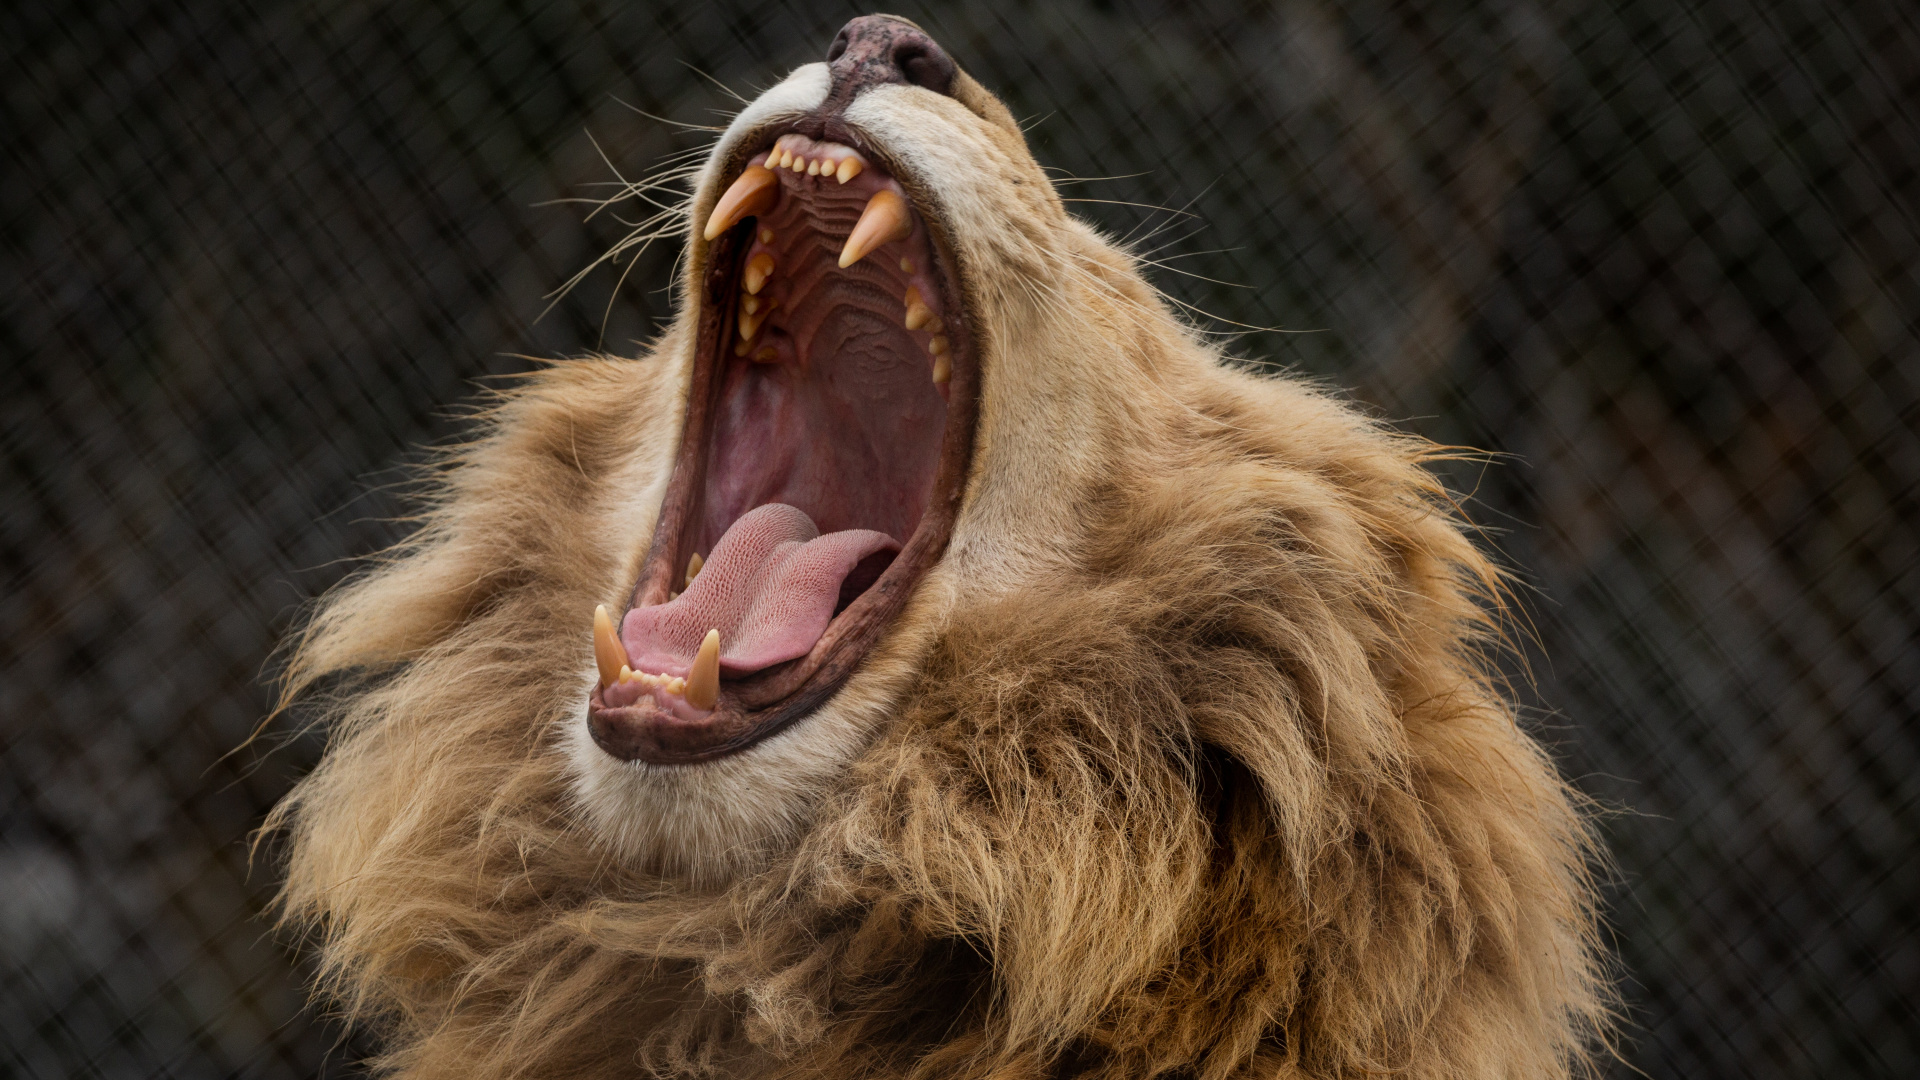 Brown Lion Showing Tongue During Daytime. Wallpaper in 1920x1080 Resolution